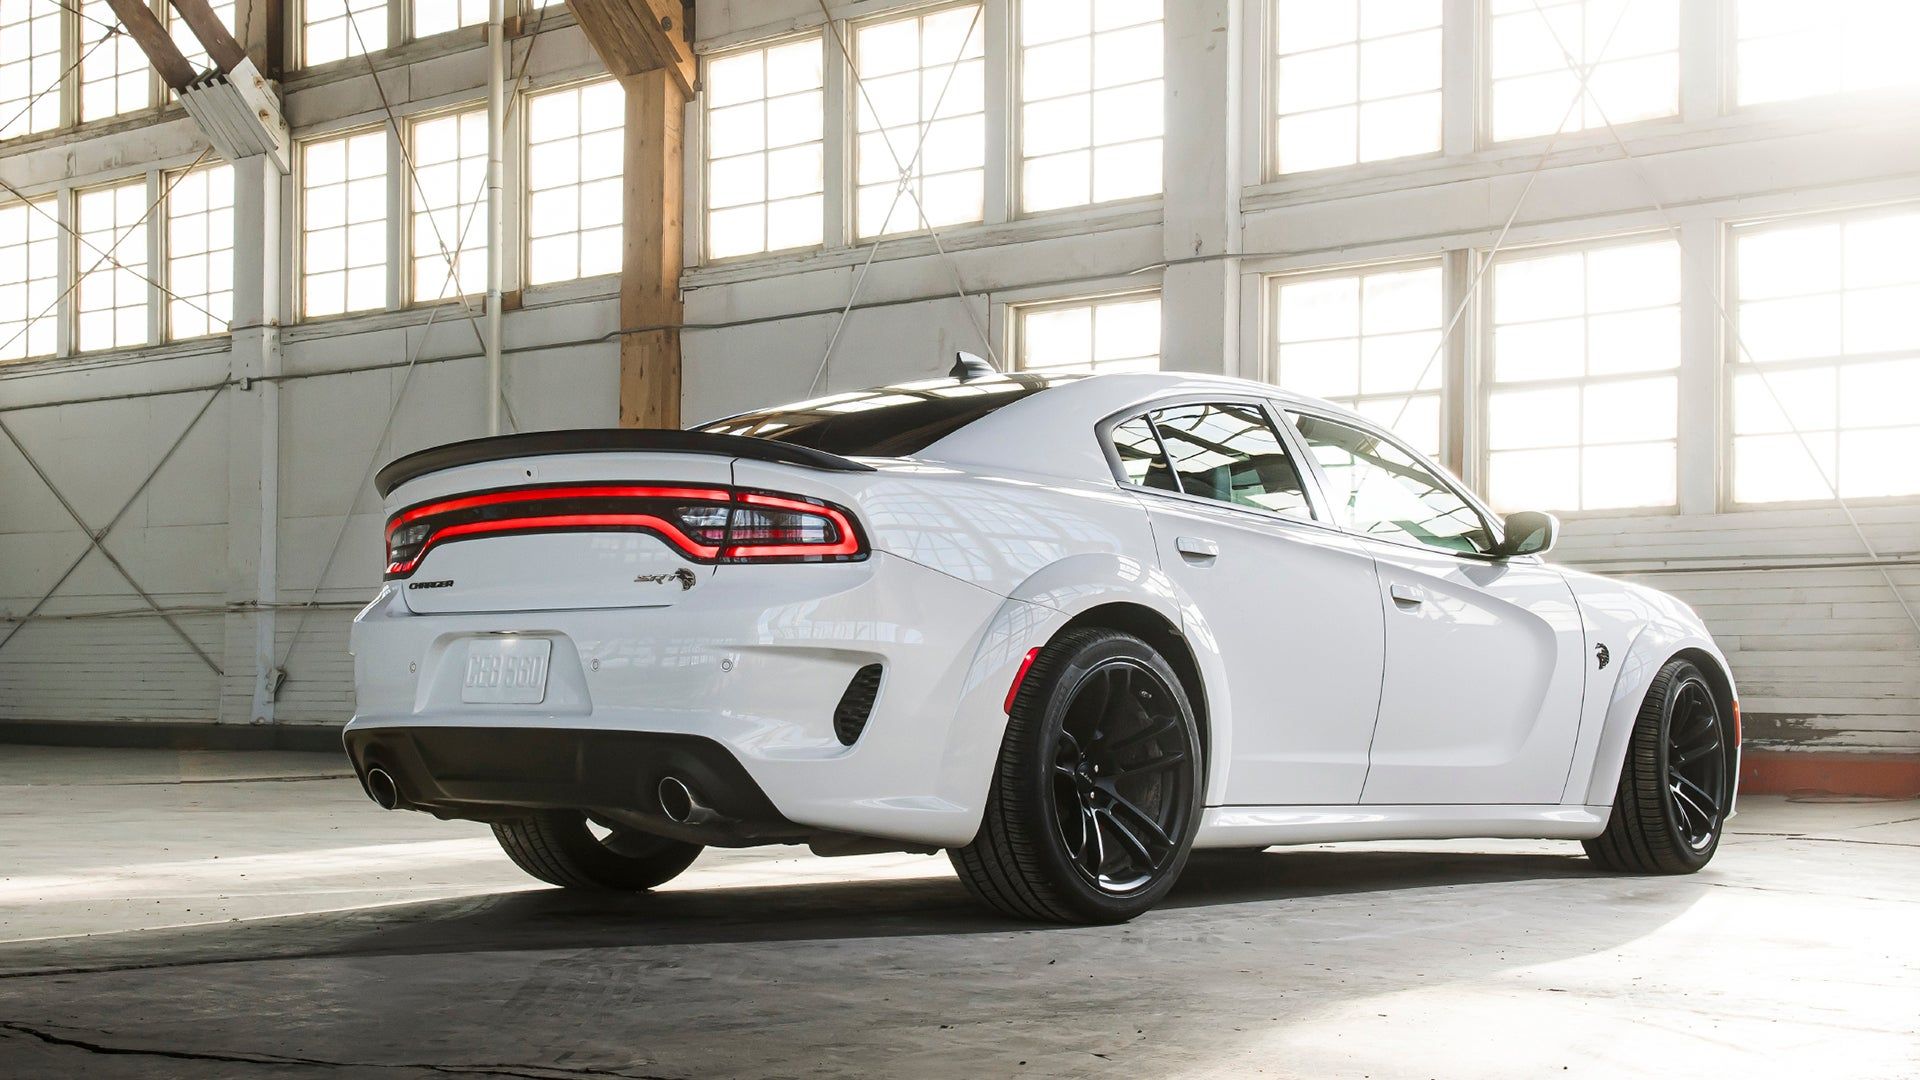 Dodge Charger SRT Hellcat Redeye Widebody Review: If It Ain't Broke, Just Add 797 HP